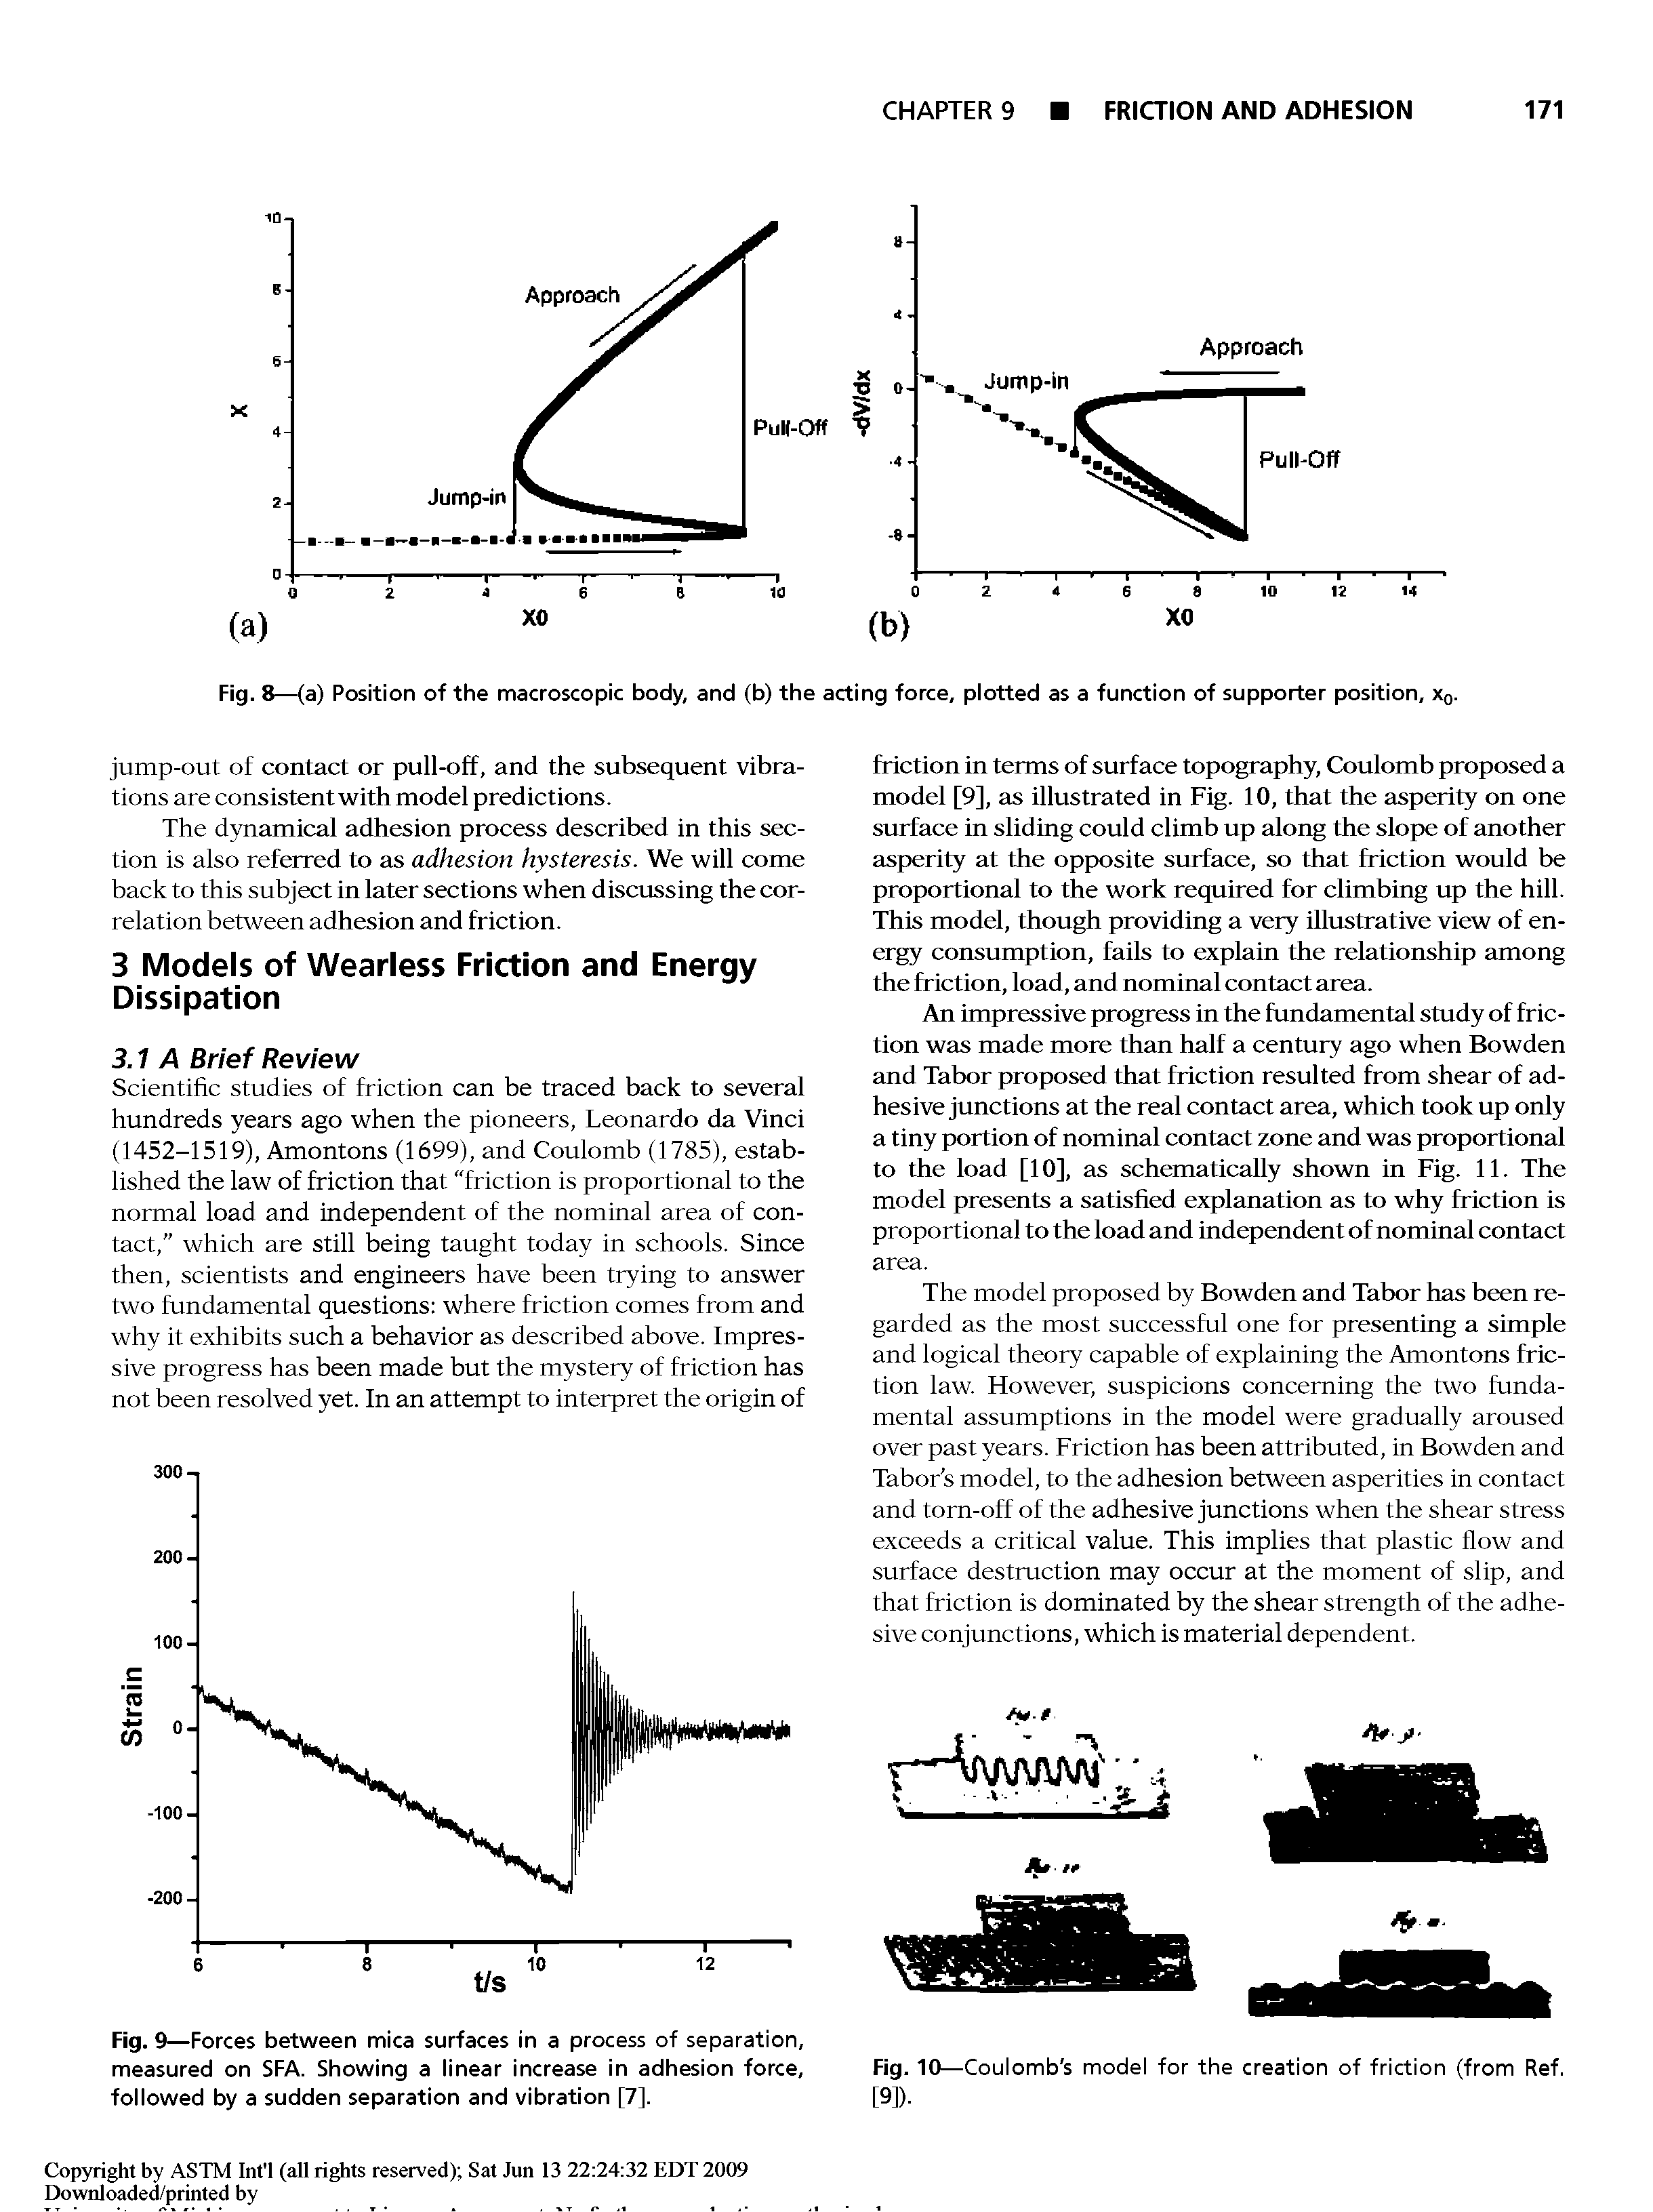 Fig. 9—Forces between mica surfaces in a process of separation, measured on SFA. Showing a linear increase in adhesion force, followed by a sudden separation and vibration [7].